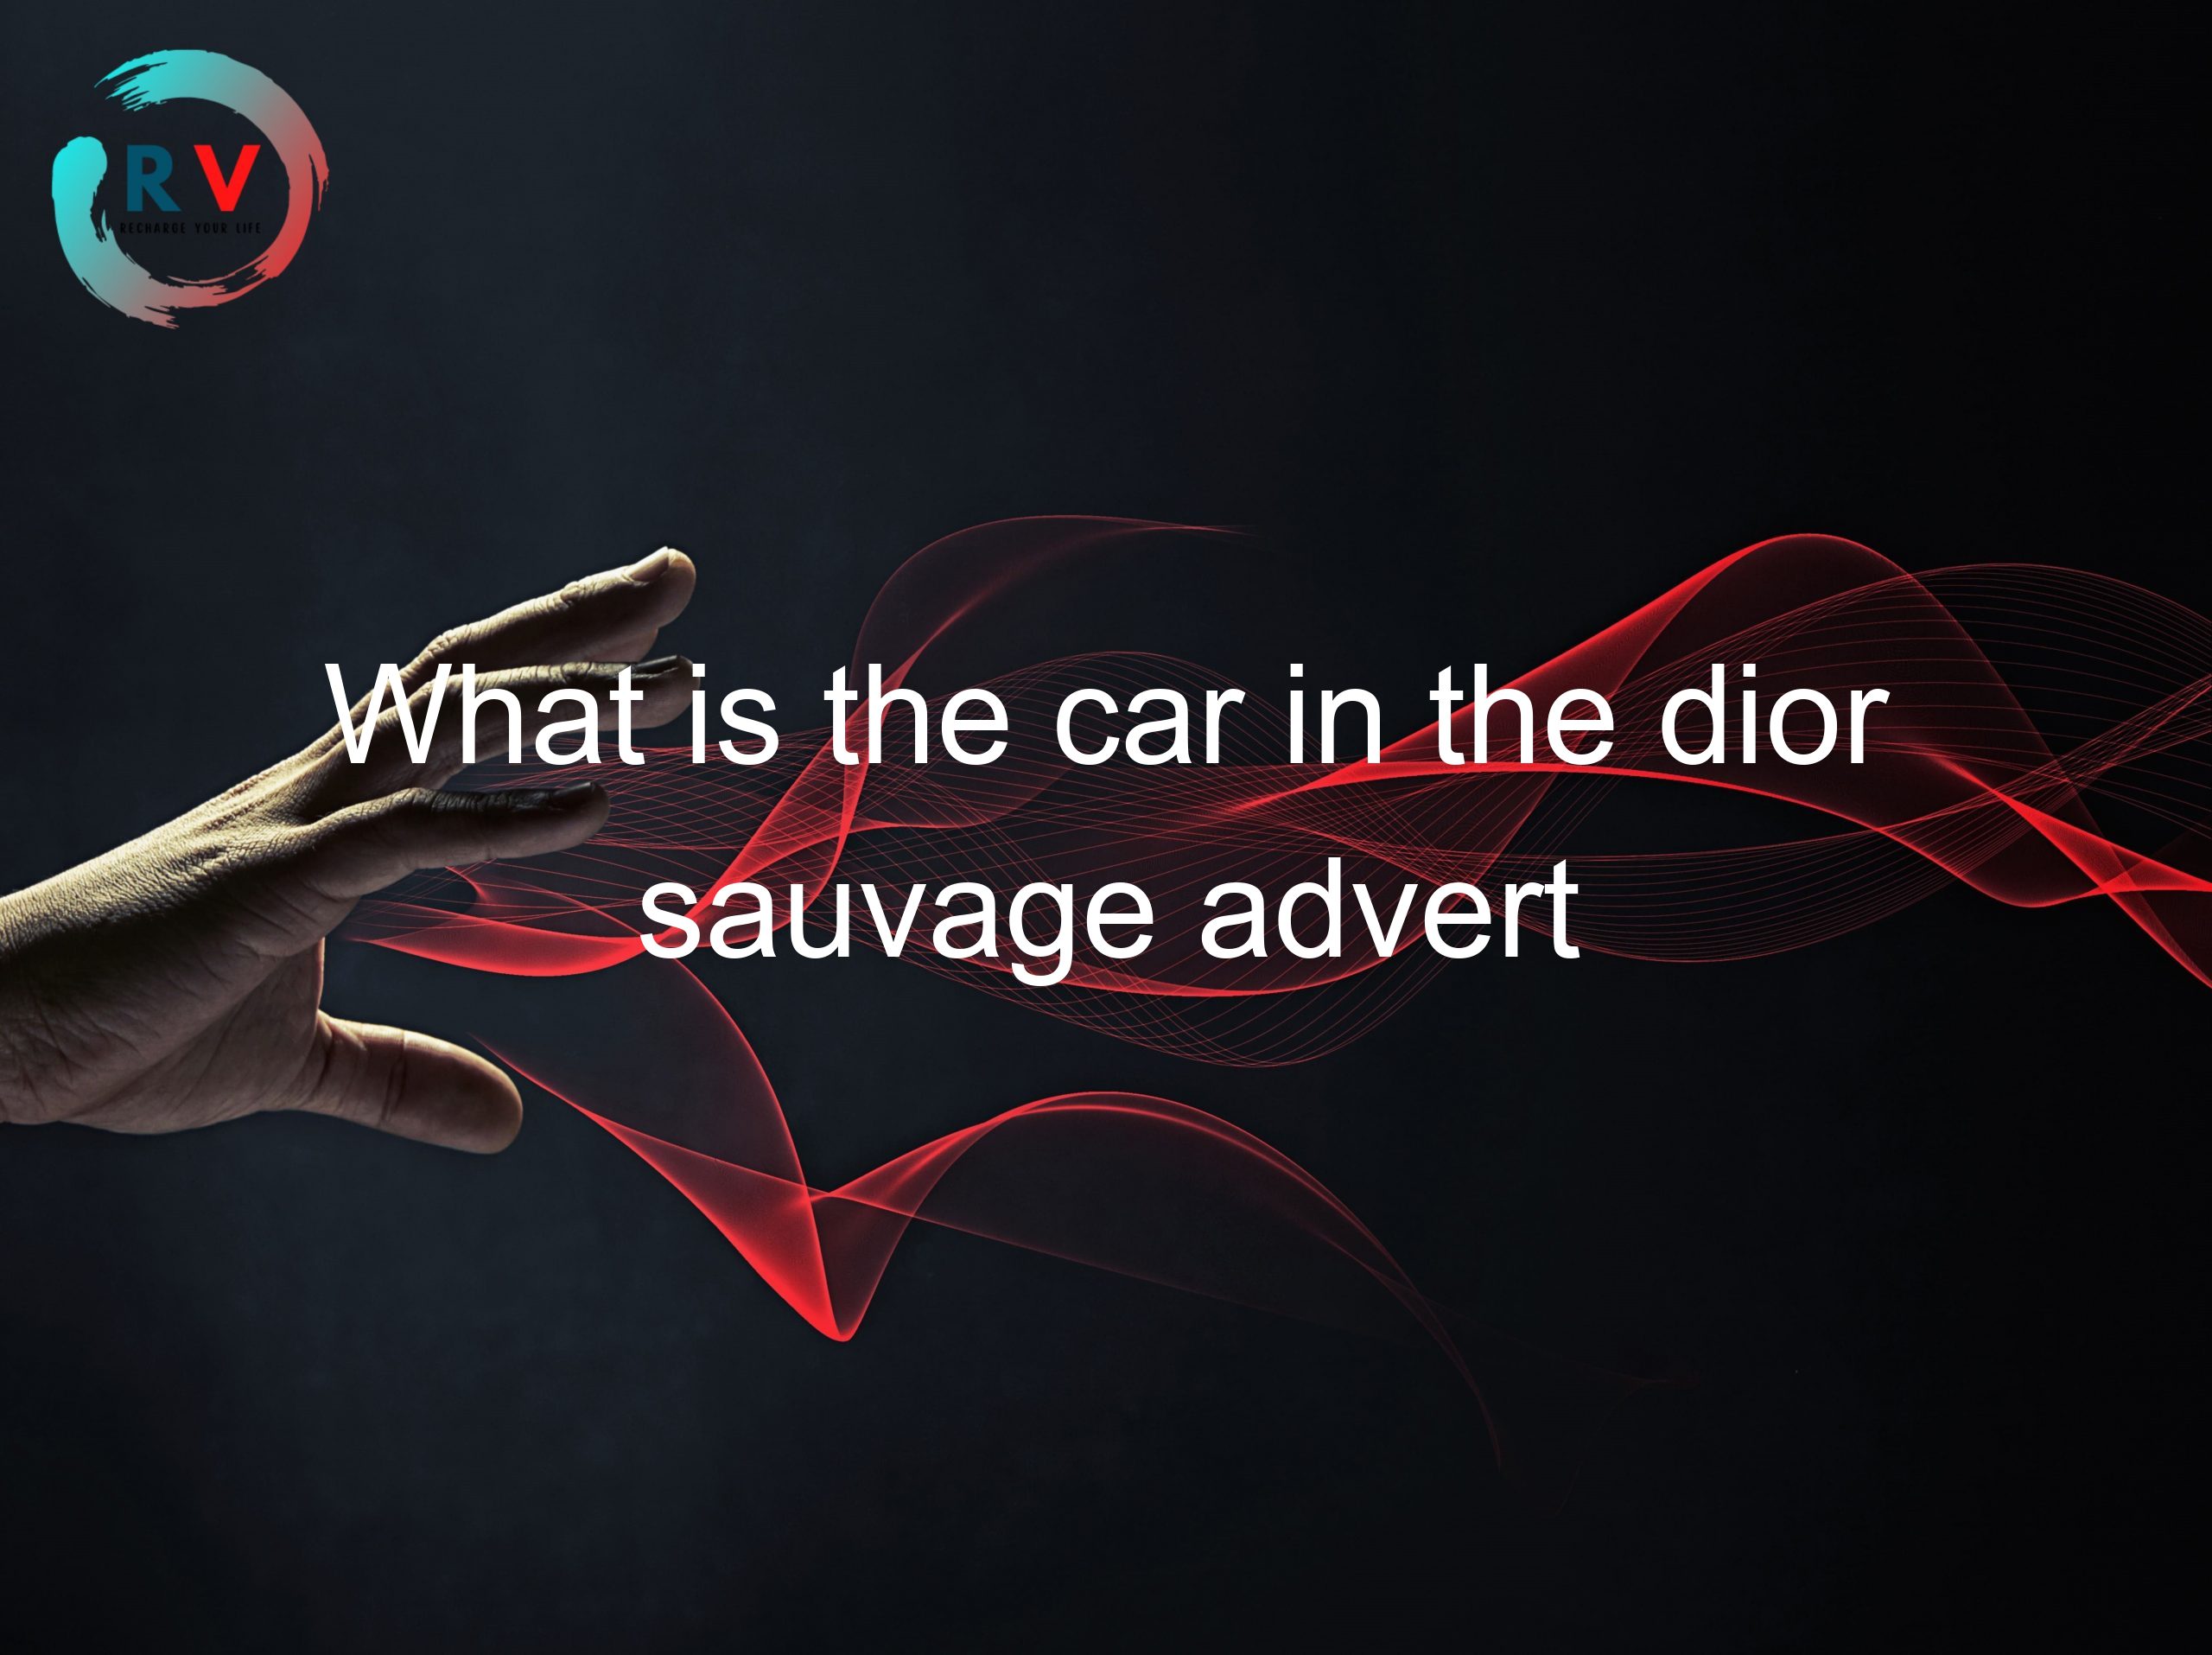 What is the car in the dior sauvage advert